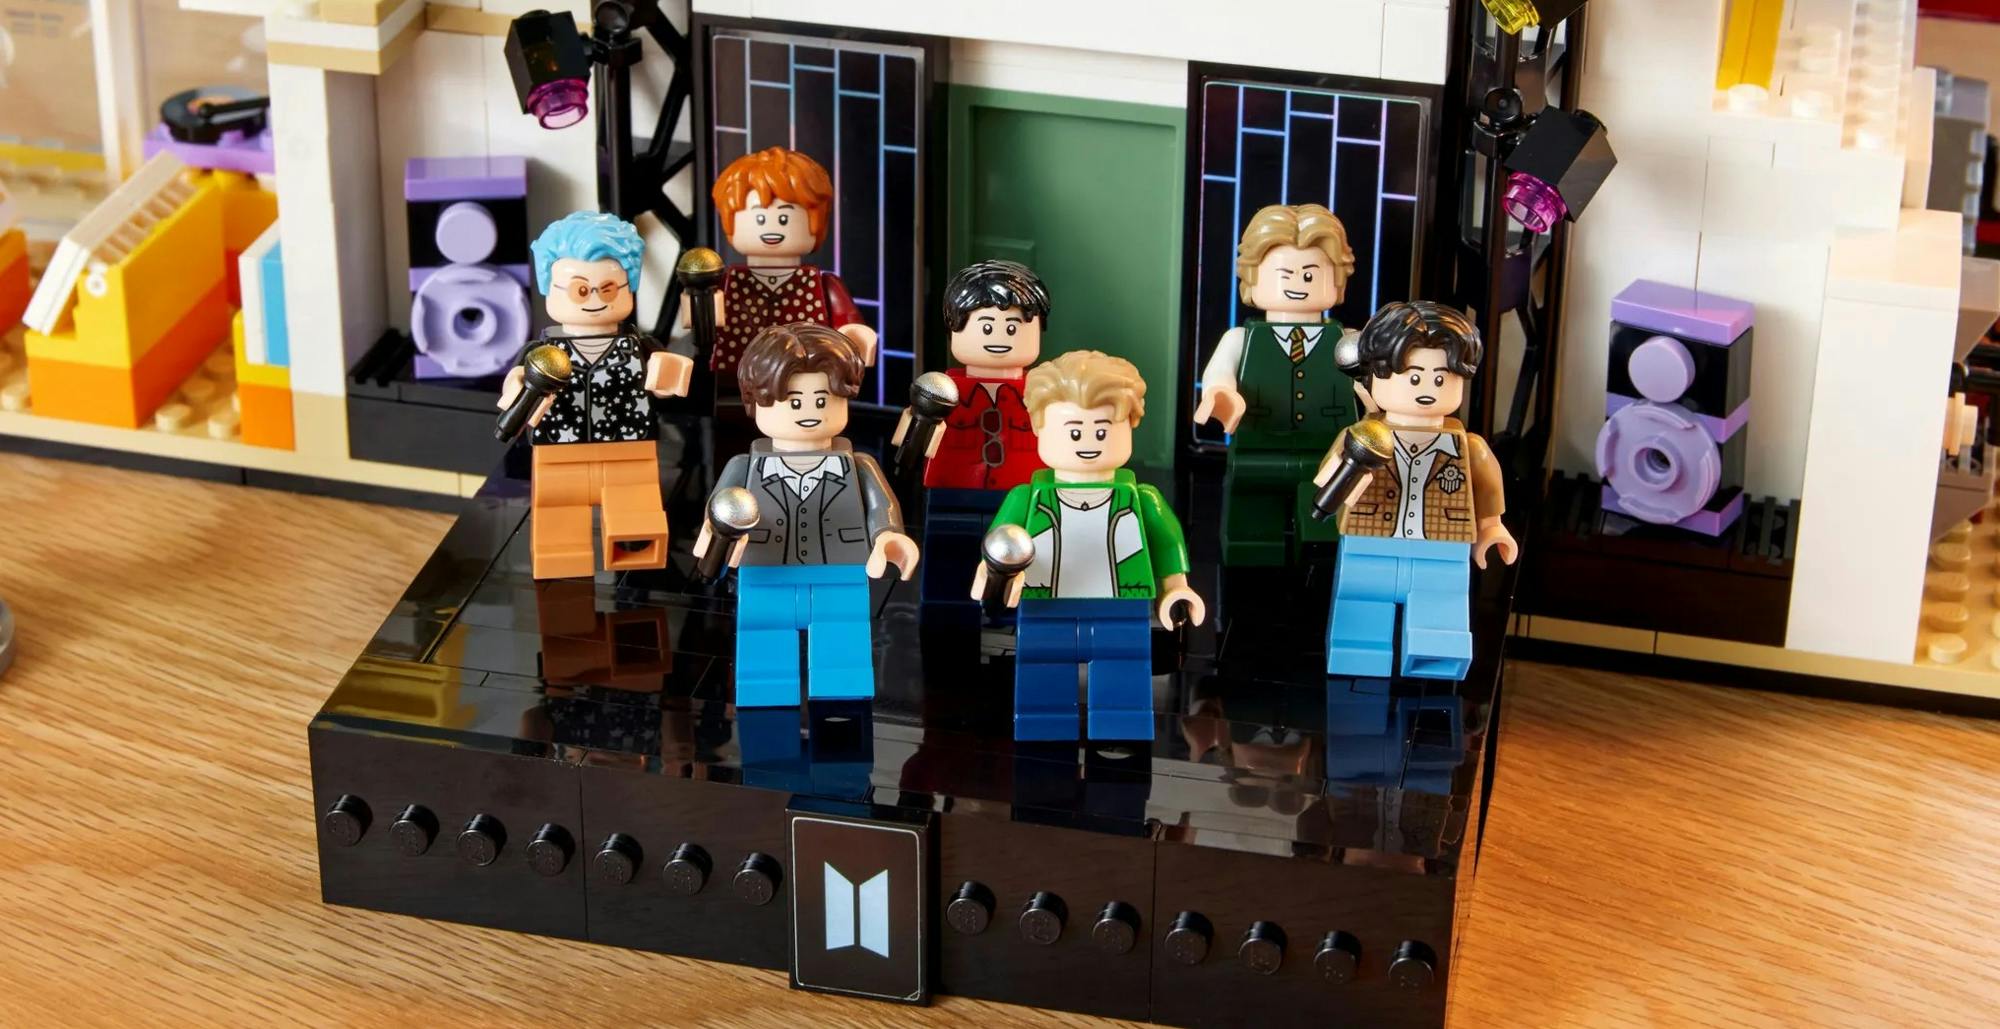 The BTS Dynamite Lego Set Is Finally Here — But It's Pricey